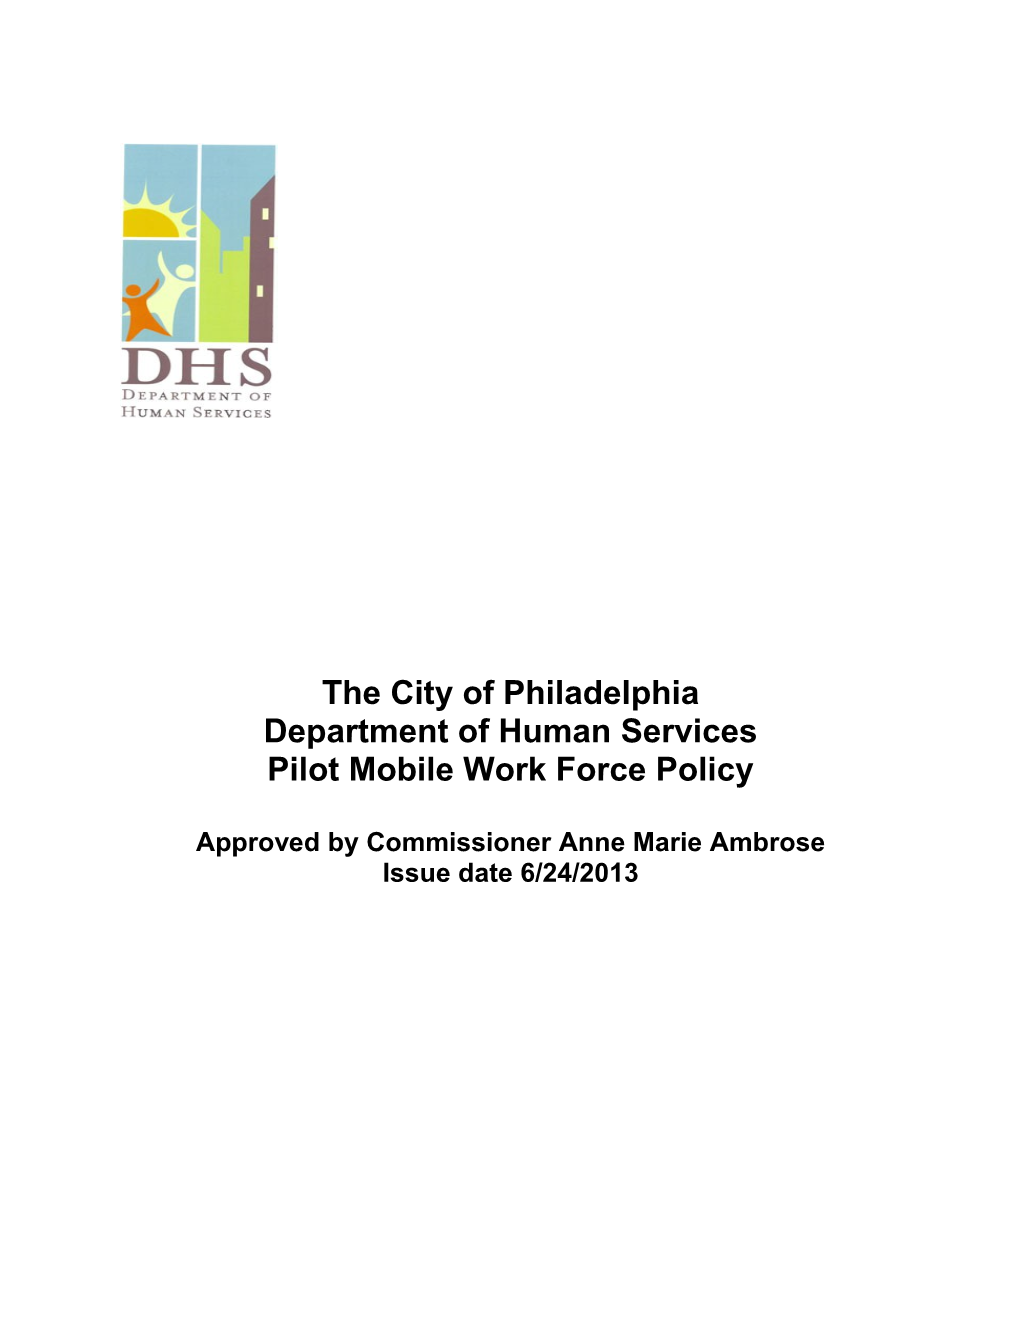 The Philadelphia Department Of Human Services